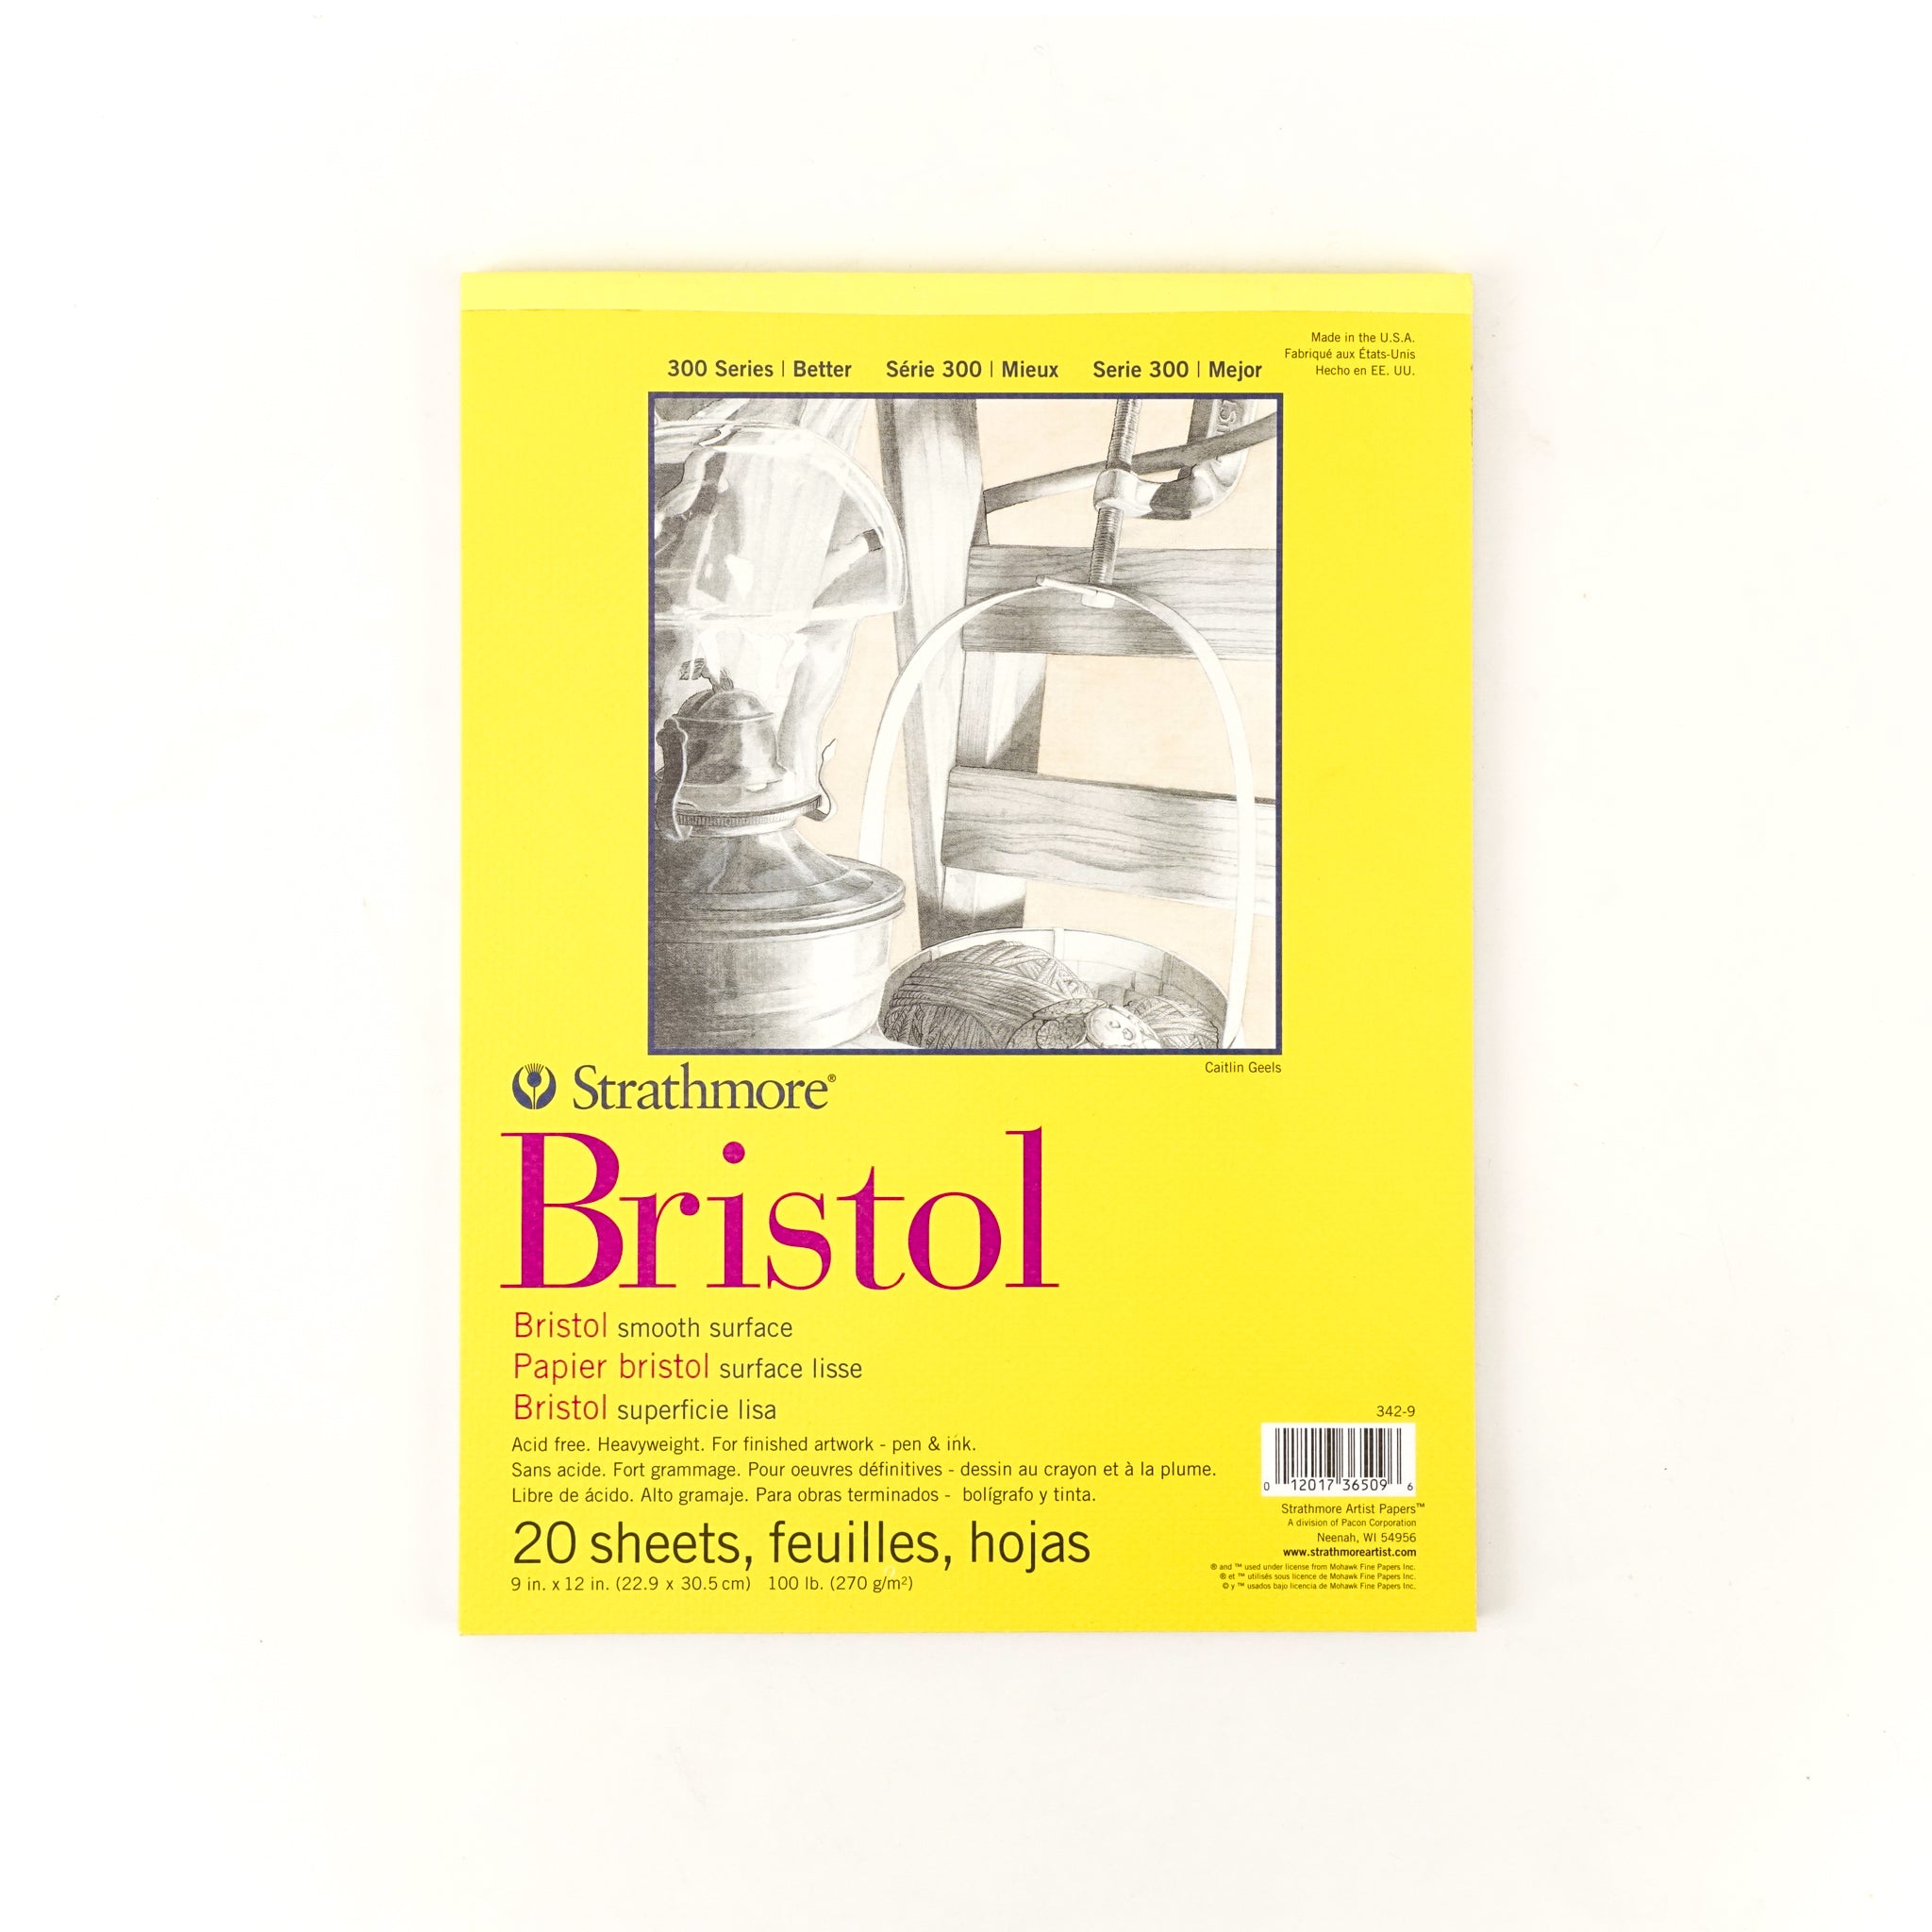 Strathmore 300 Series Bristol Paper Pad - Smooth Surface